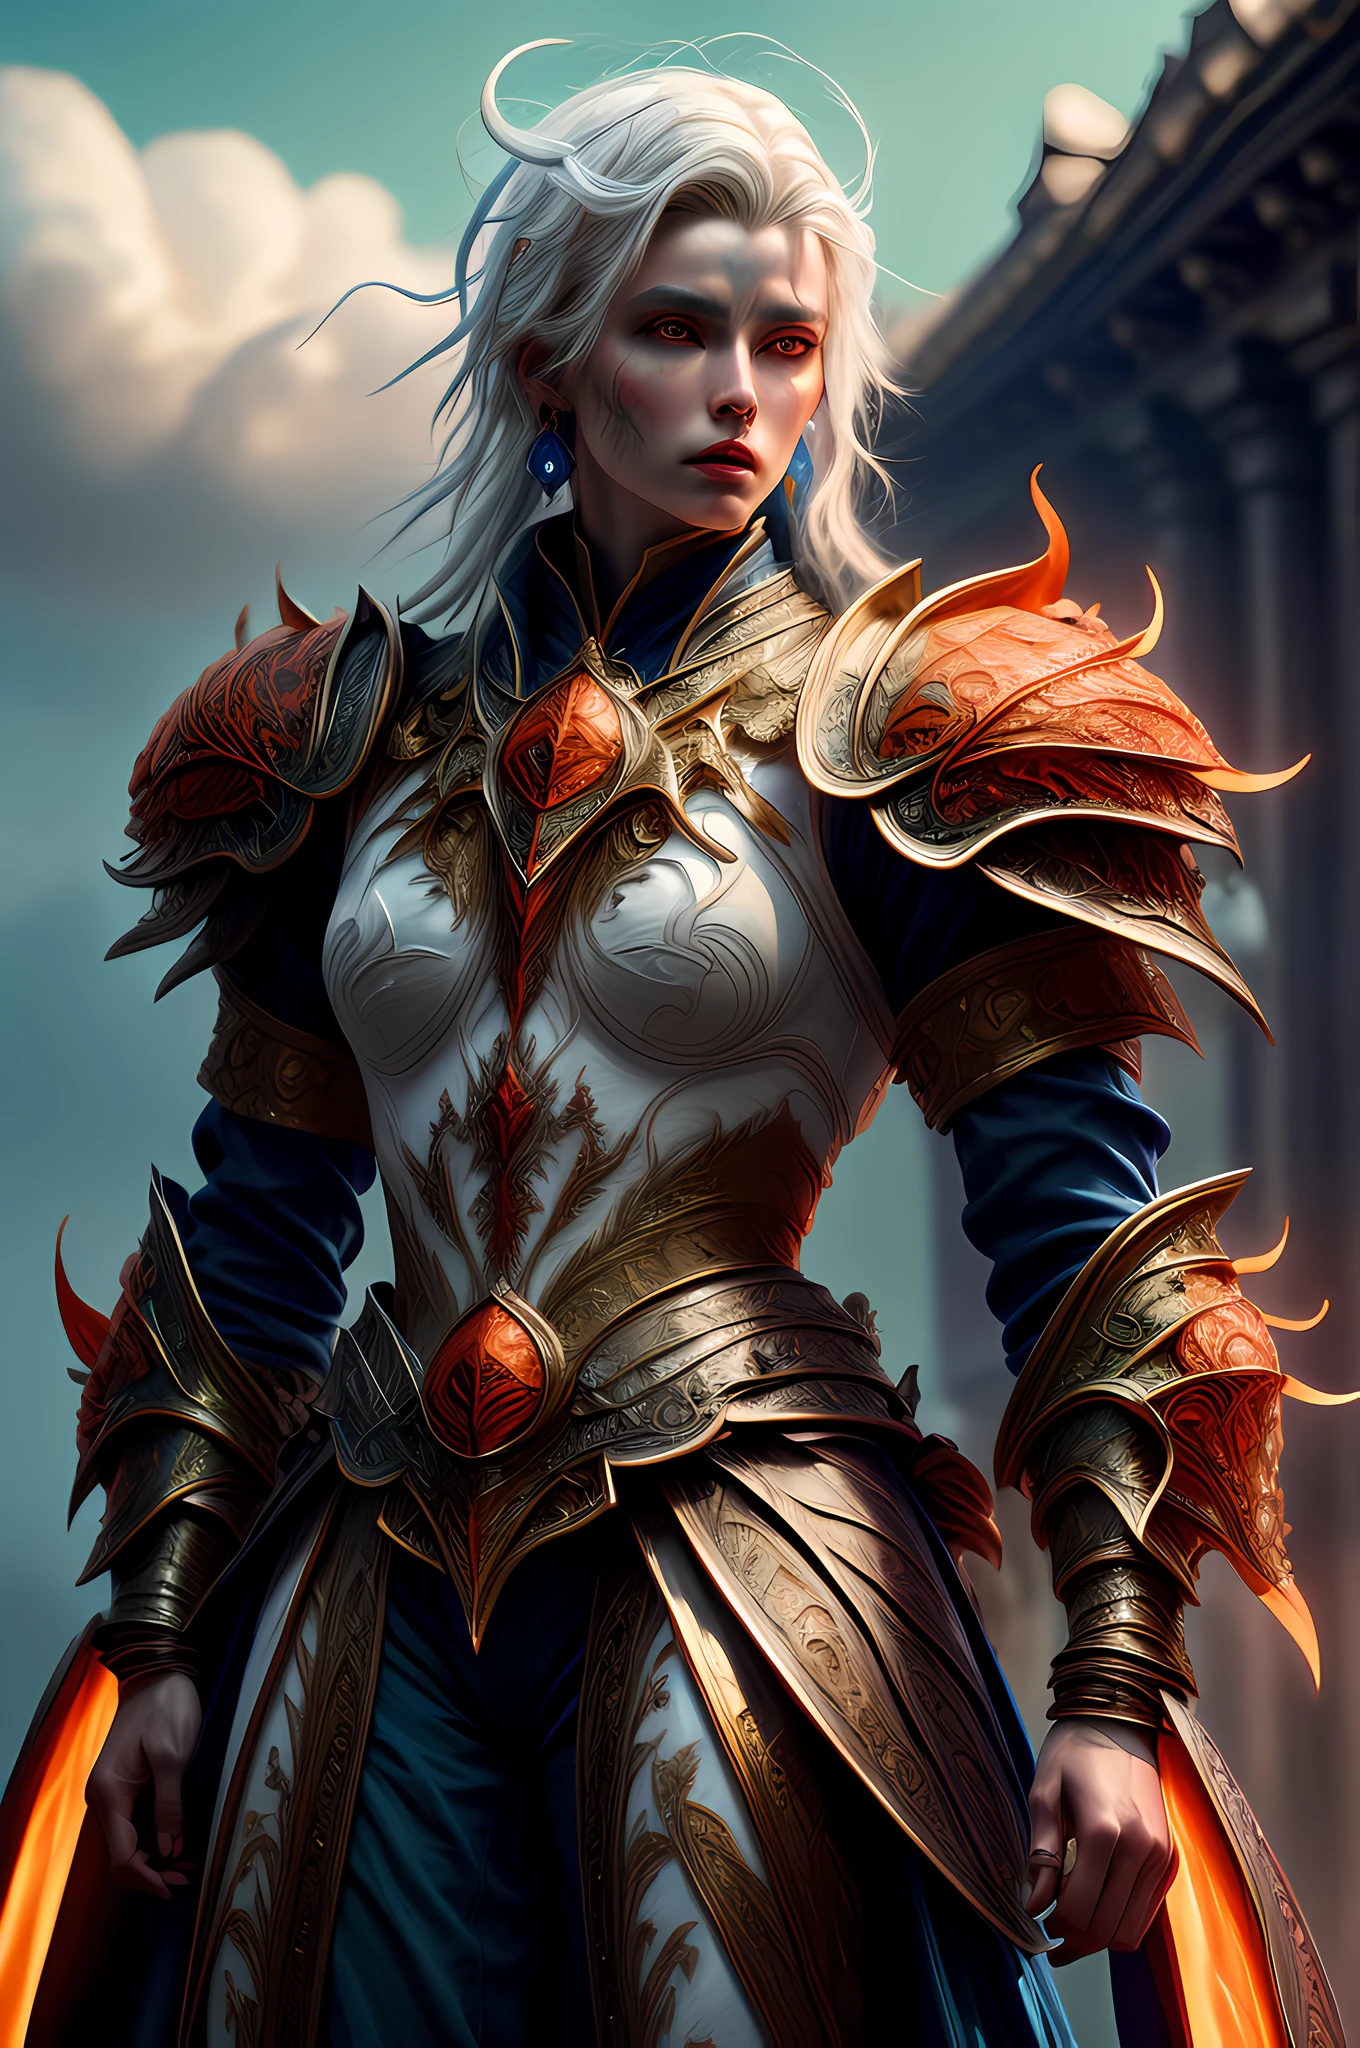 fantasy art, dnd art, RPG art, drkfntasy wide shot, (masterpiece:1.3), full body intense details, highly detailed, photorealistic, best quality, highres, portrait a vedalken female (fantasy art, Masterpiece, best quality: 1.3) (blue colored skin: 1.3), intense details facial detail fantasy art, Masterpiece, best quality)cleric, (blue colored skin: 1.3) 1person blue_skin, (white hair: 1.3), long hair, intense green eye, fantasy art, Masterpiece, best quality) armed a fiery sword red fire, wearing heavy (white: 1.3) half plate mail armor LnF wearing high heeled laced boots, wearing an(orange :1.3) cloak, wearing glowing holy symbol GlowingRunes_yellow,  within fantasy temple background and sun and clouds, reflection light, high details, best quality, 16k, [ultra detailed], masterpiece, best quality, (extremely detailed), dynamic angle, ultra wide shot, photorealistic, RAW, fantasy art, dnd art, fantasy art, realistic art